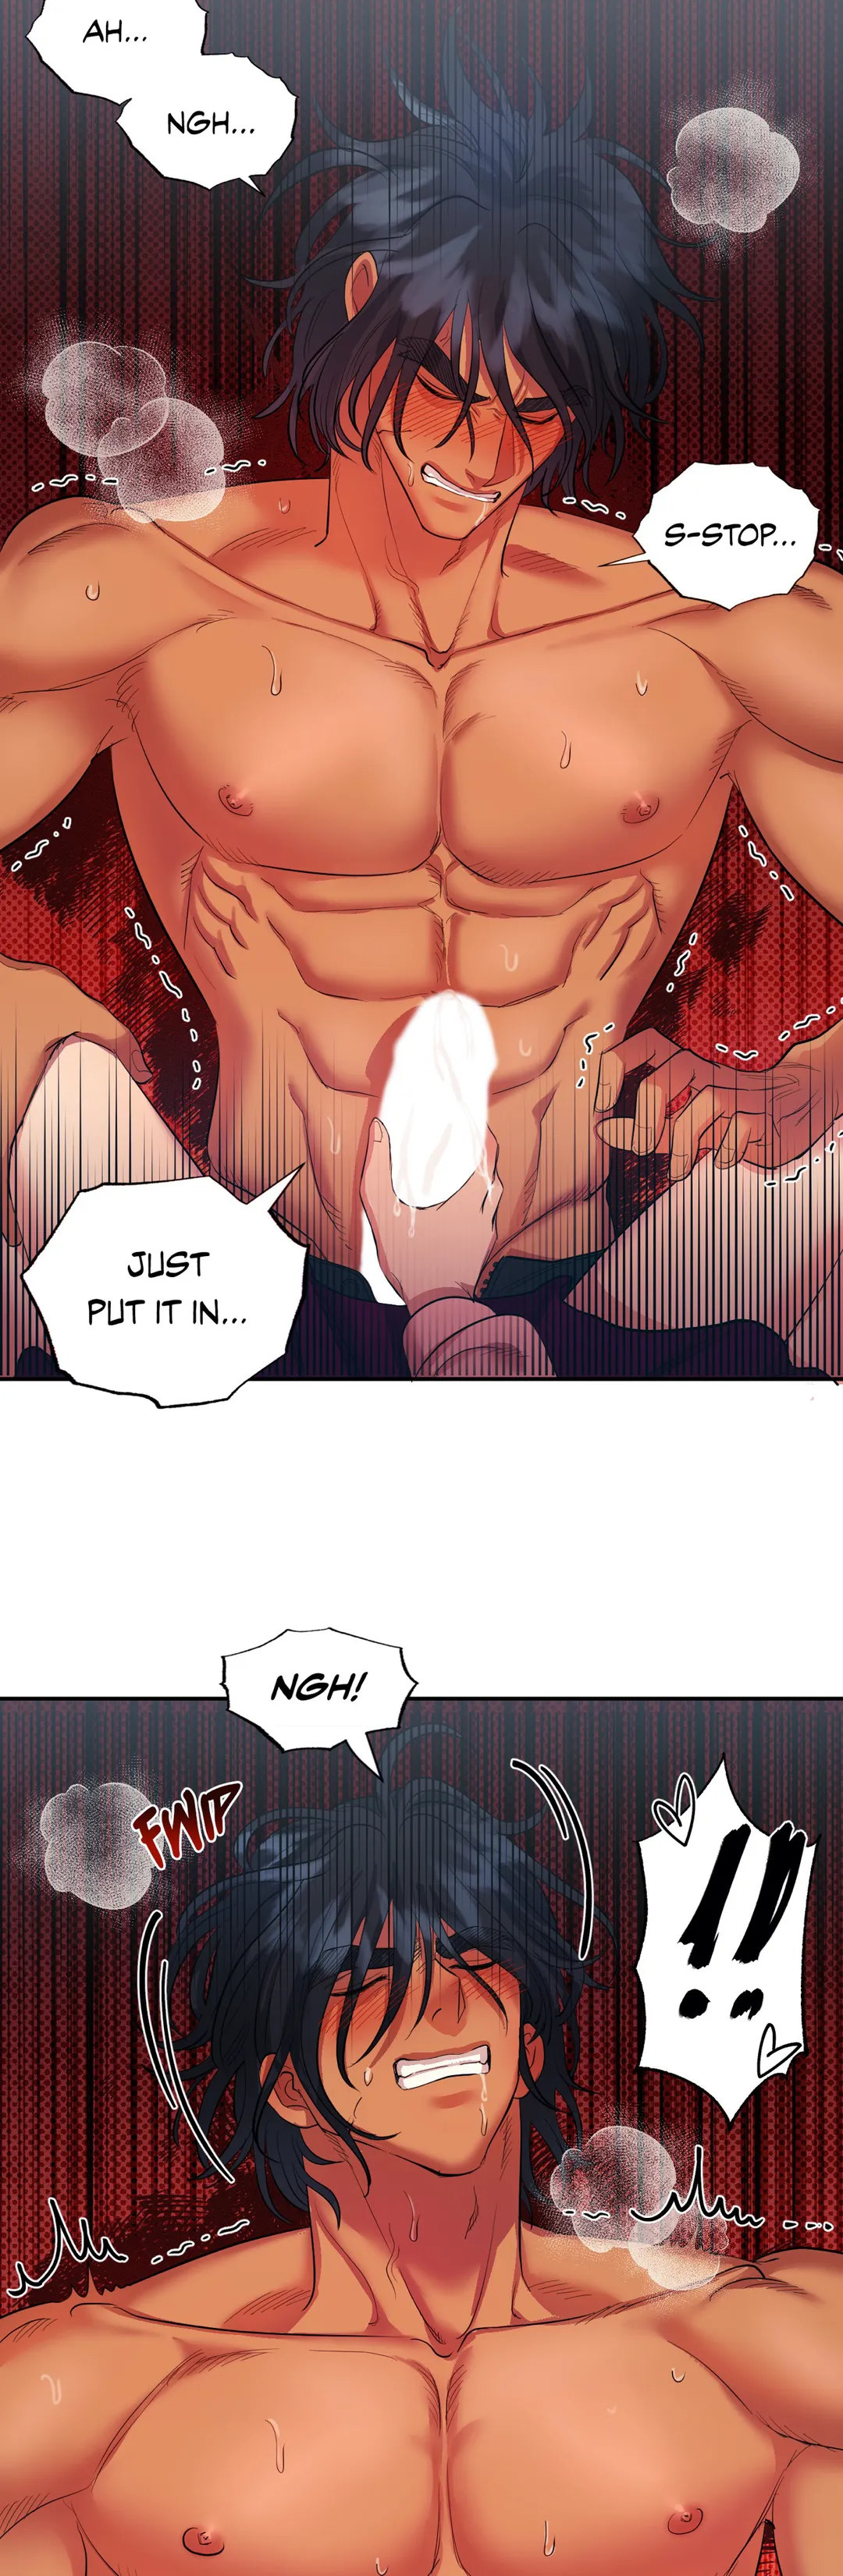 Hana’s Demons of Lust - Chapter 11 Page 26